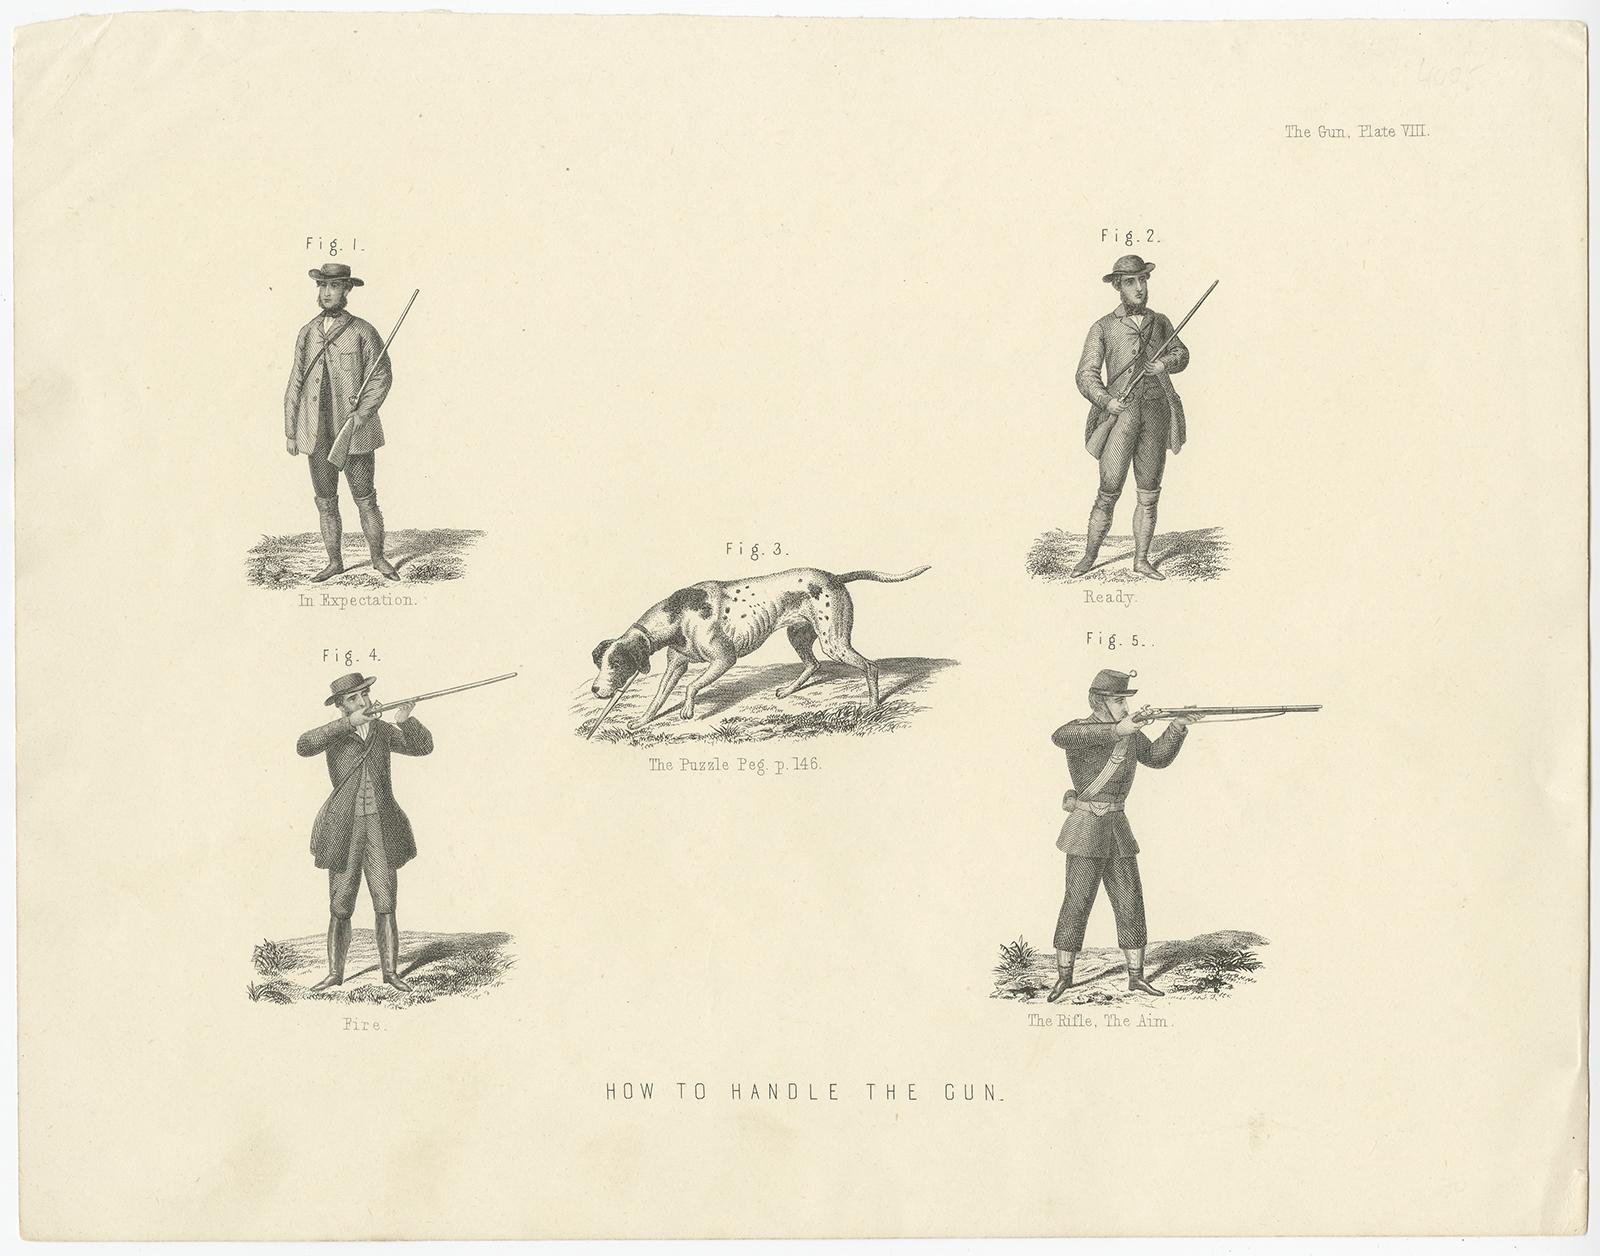 Antique print titled 'Pl. VIII The Gun - How to Handle the Gun'. This print depicts 1. In expectation, 2. Ready, 3. The Puzzle Peg, 4. Fire, 5. The Rifle, The Aim.

This print originates from 'The Book of English Country Life'.